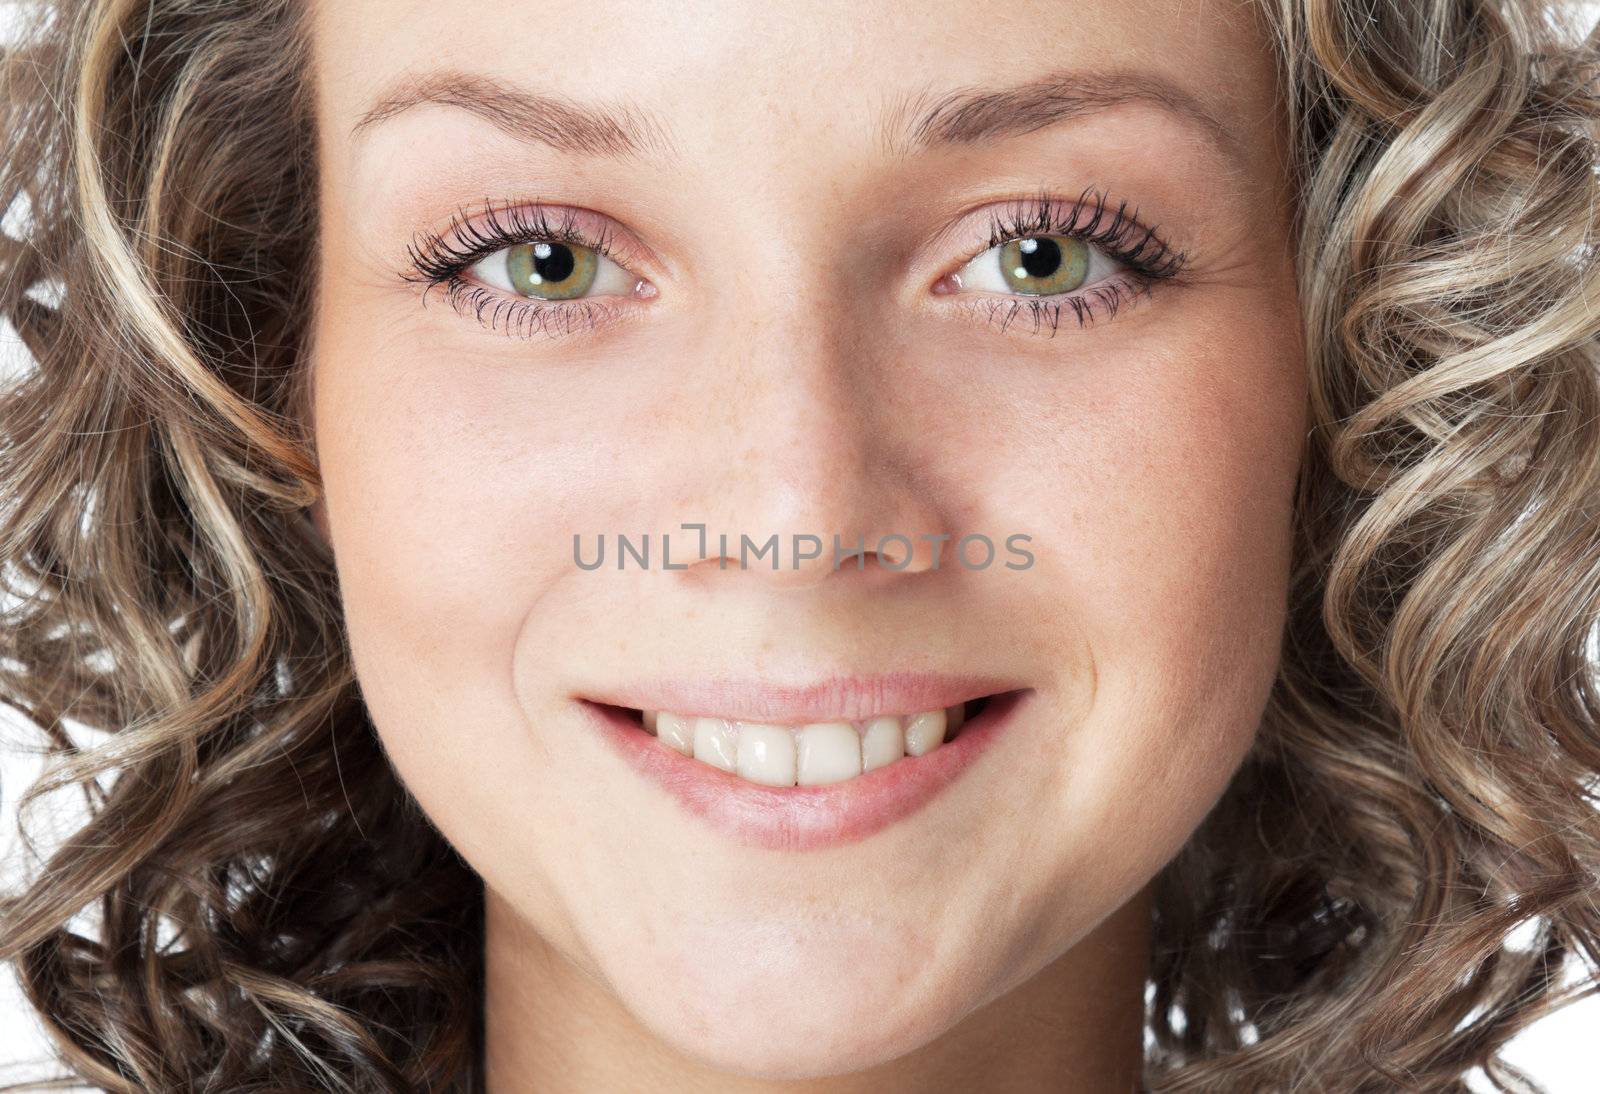 Closeup portrait of a smiling young woman. Green eyes and toothy smile